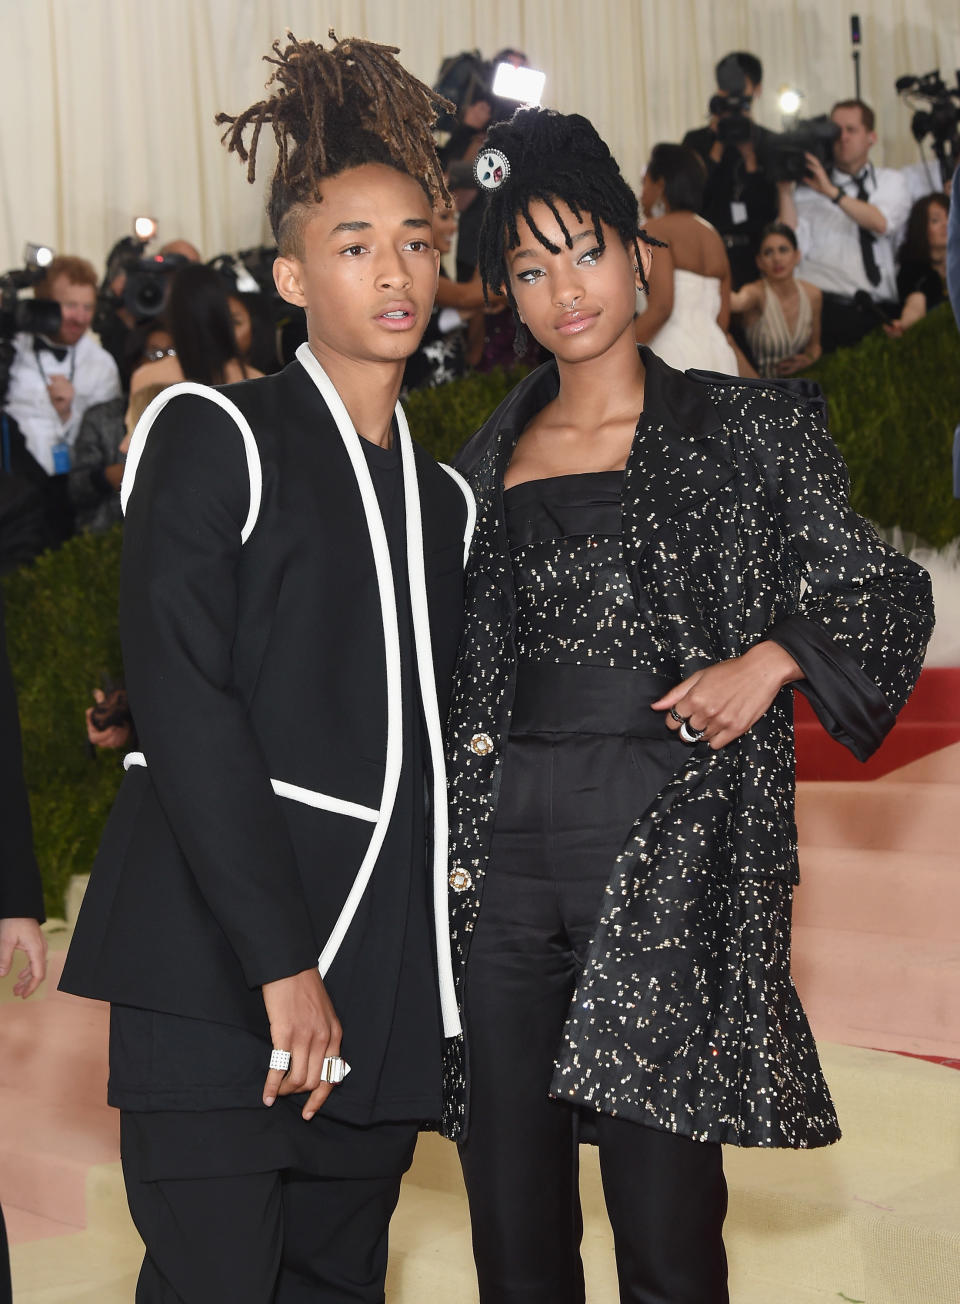 Jaden and Willow Smith posing together on the red carpet